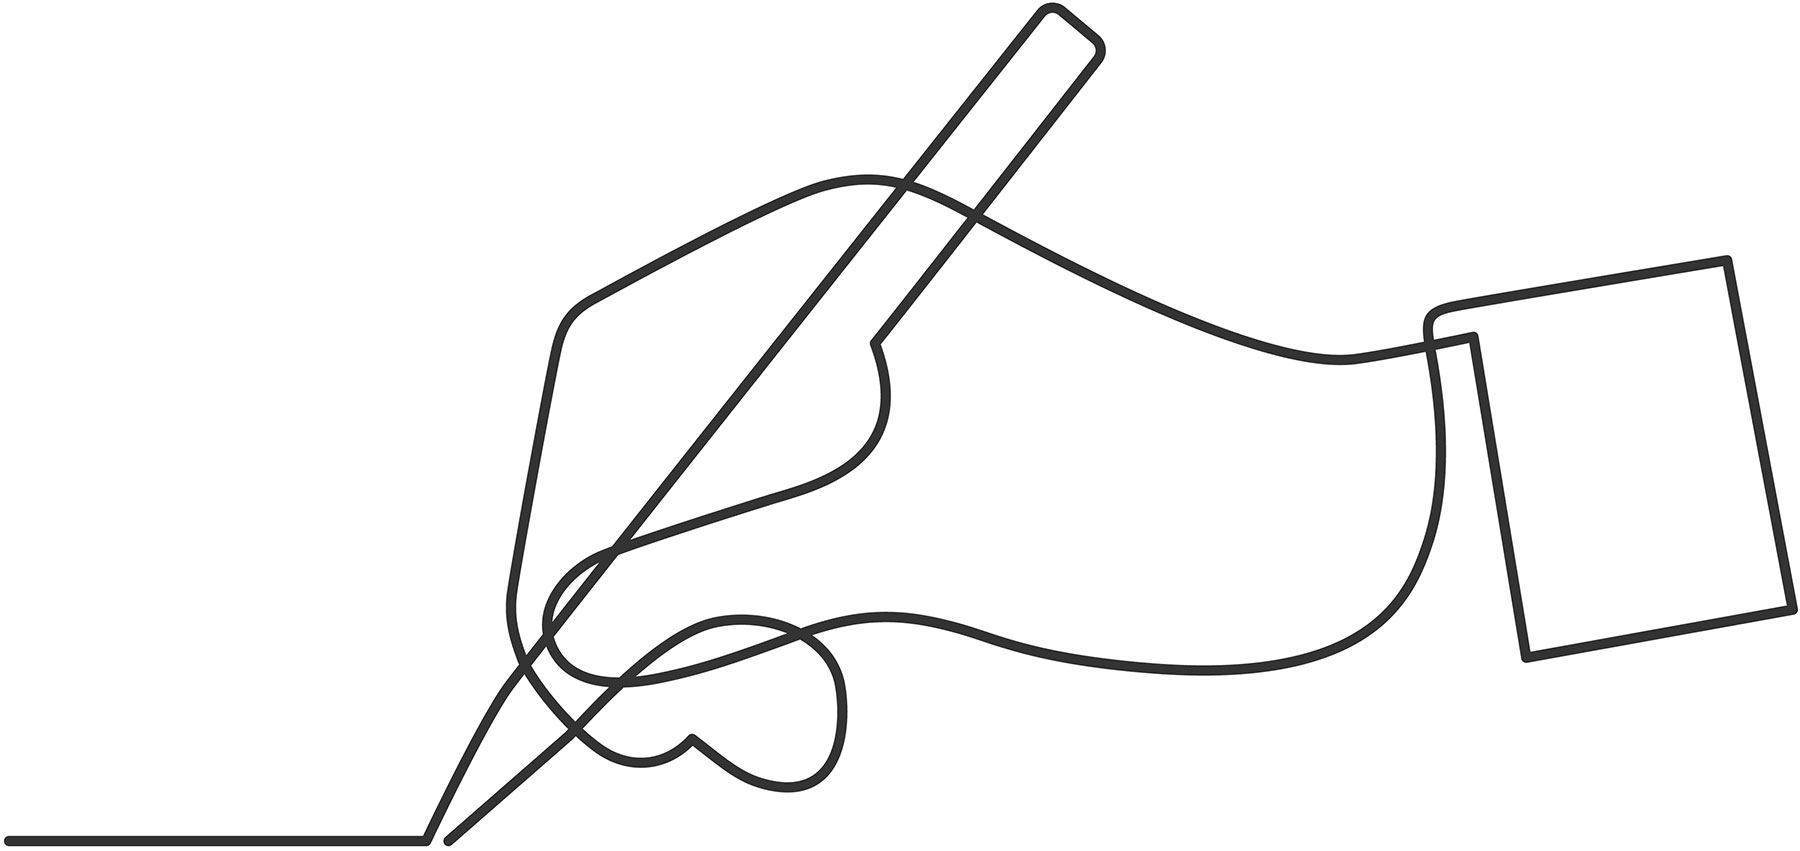 Illustration of a hand writing